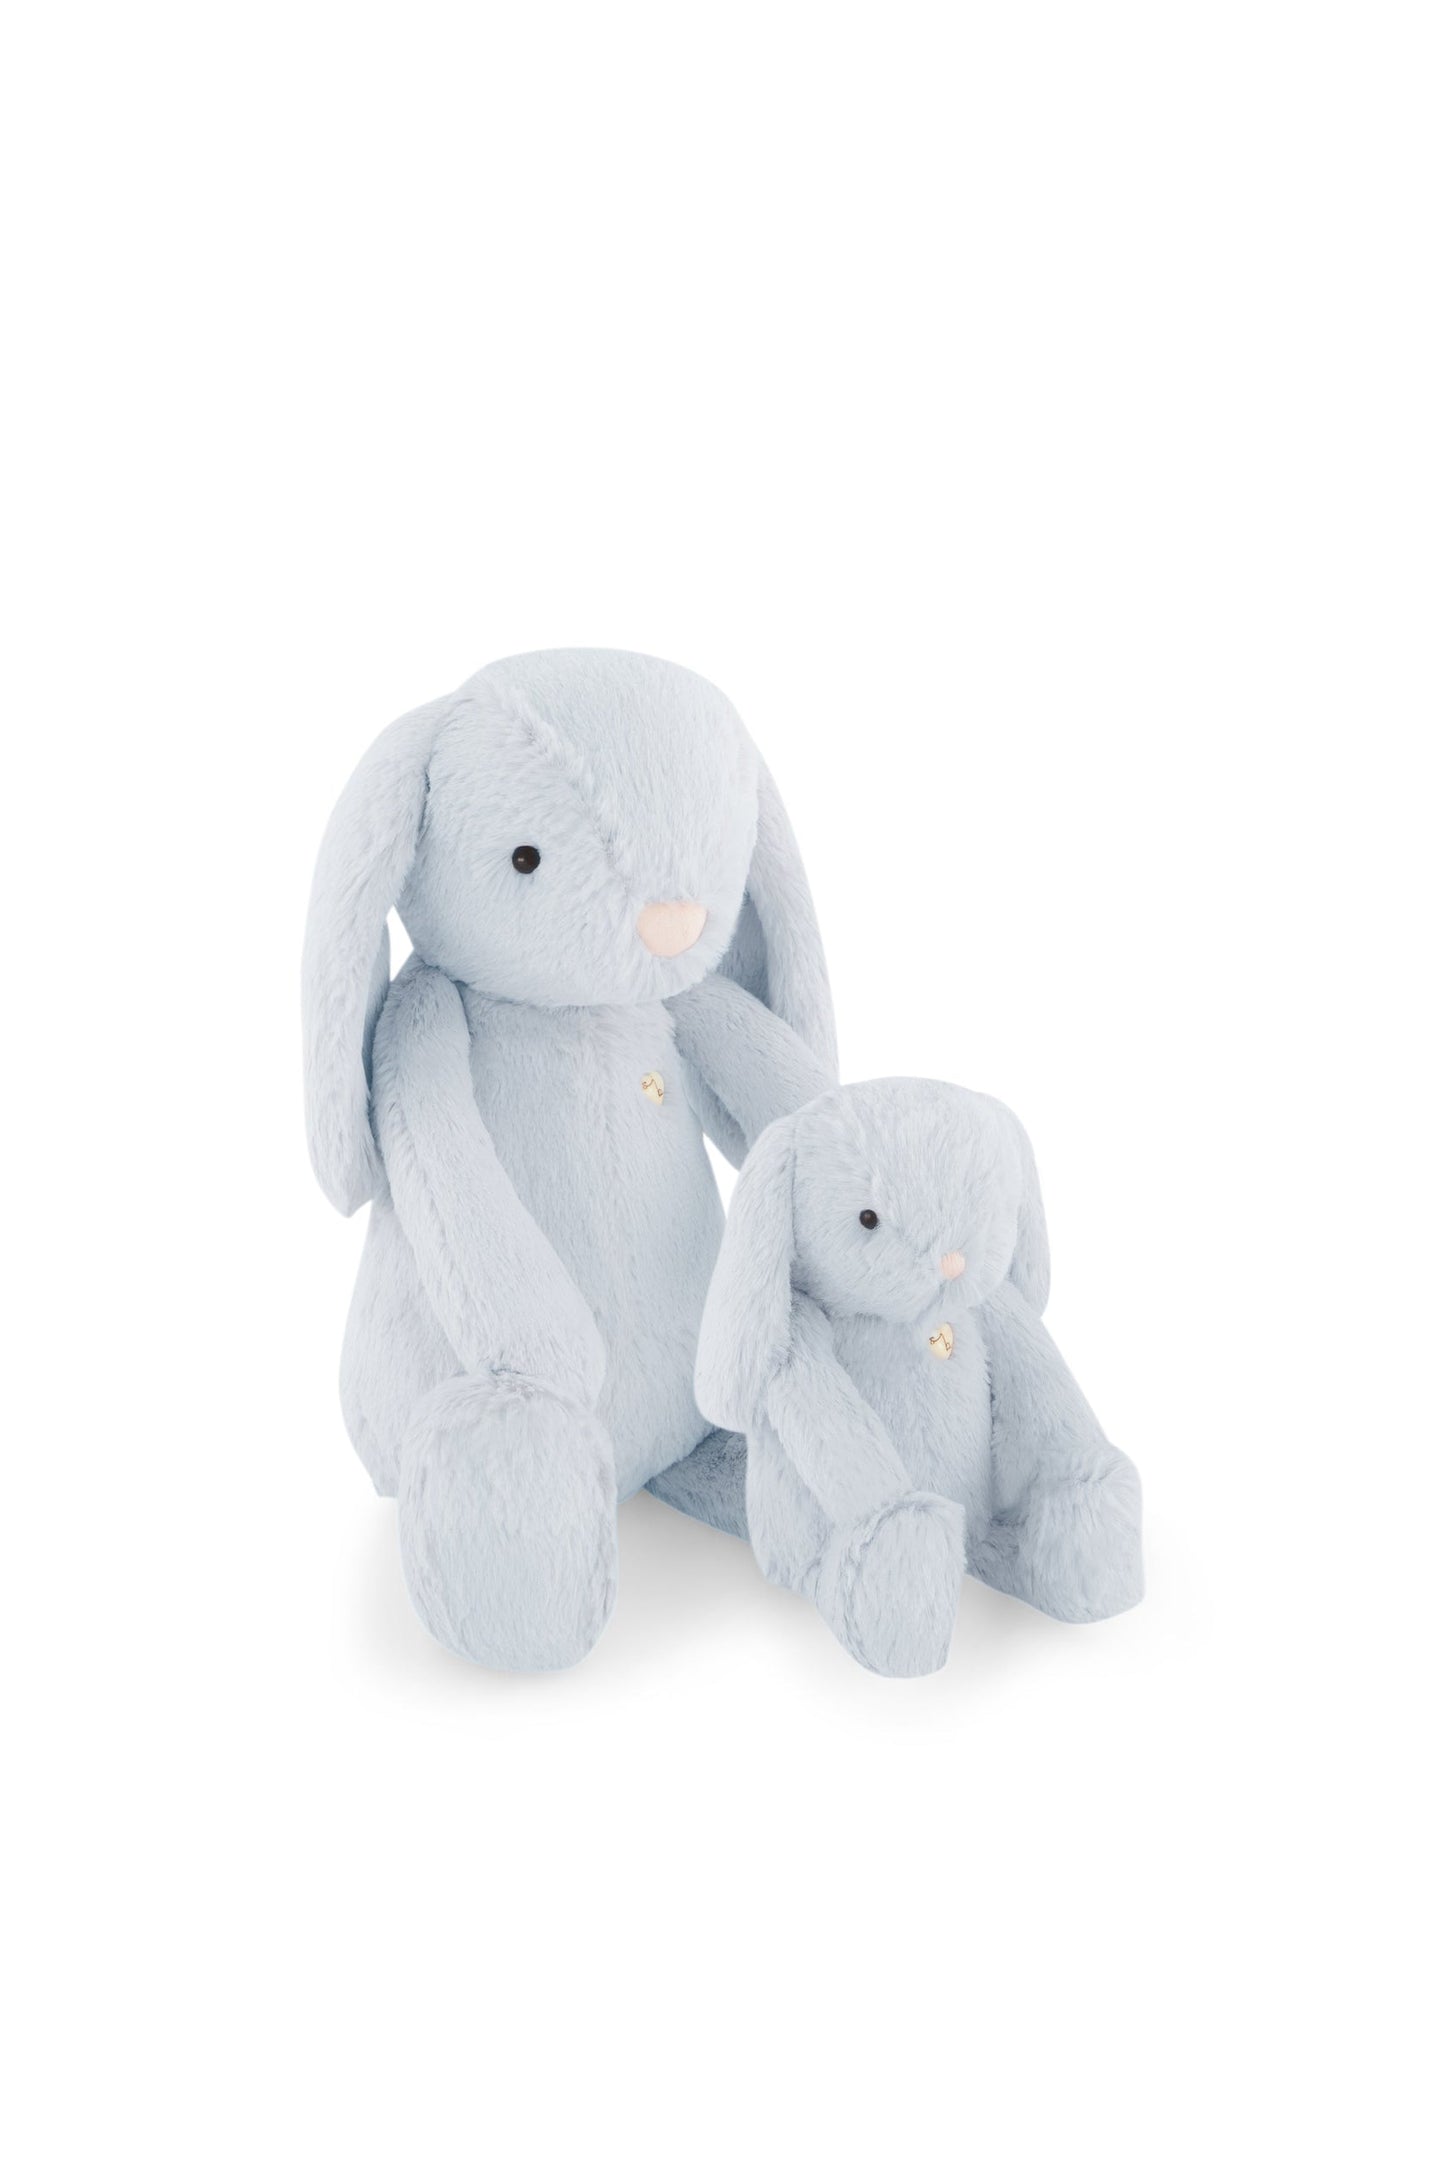 Snuggle Bunnies | Penelope the Bunny | Droplet